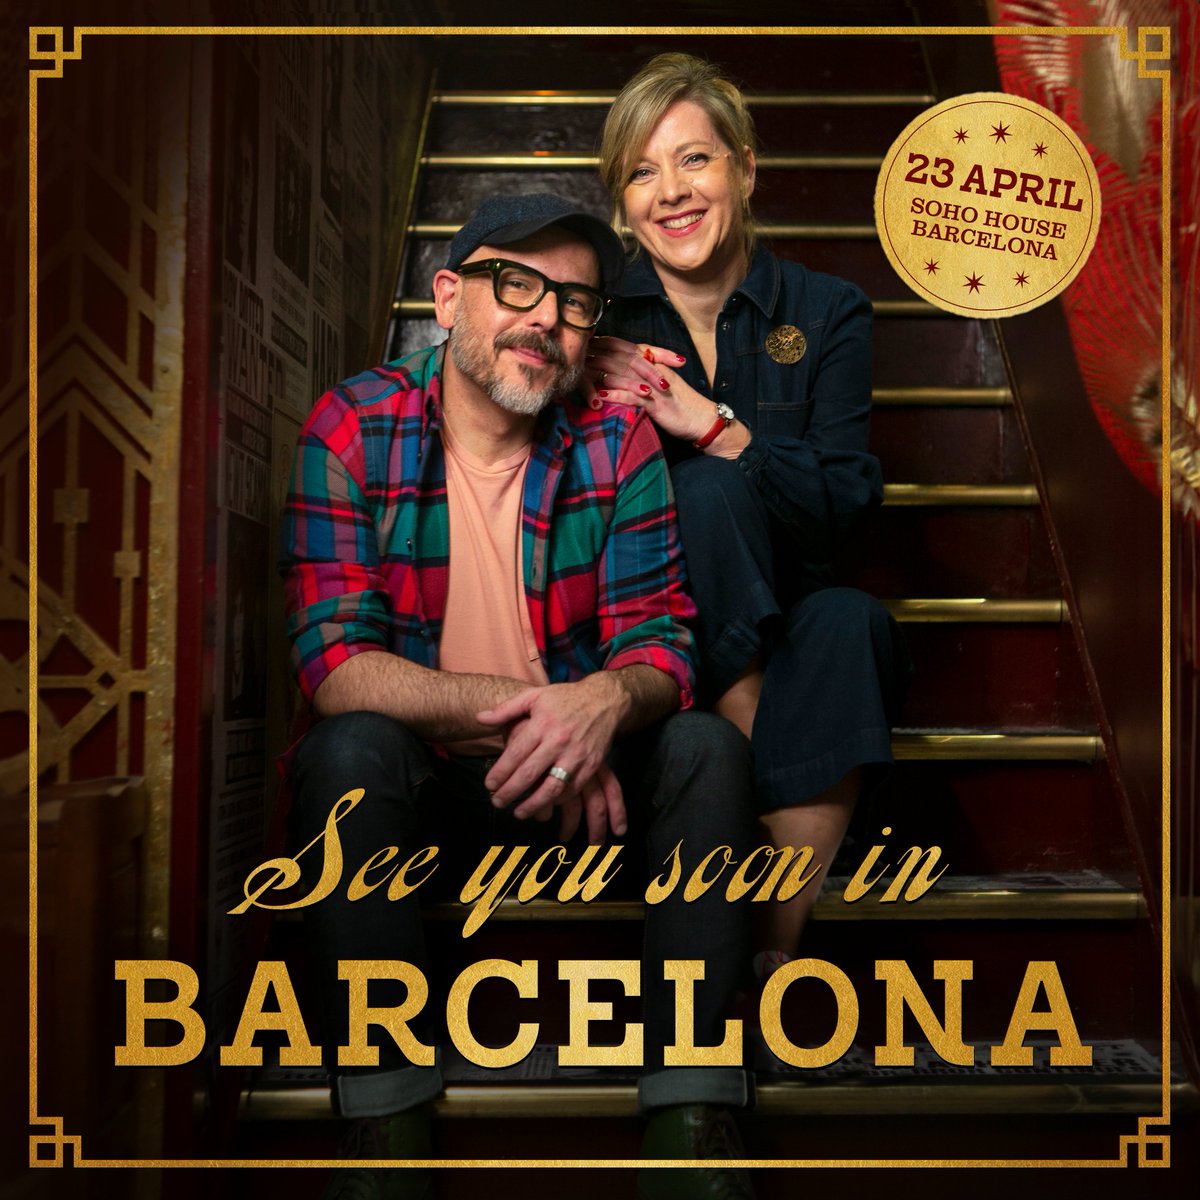 REMINDER: We are in Barcelona next Tuesday! ✍️🇪🇸 Come see us at Soho House Barcelona for a very special 🌹Sant Jordi's Day🌹 book signing.  Which Spanish witches and wizards will we have the pleasure of seeing there? Let us know in the comments if you'll be attending!